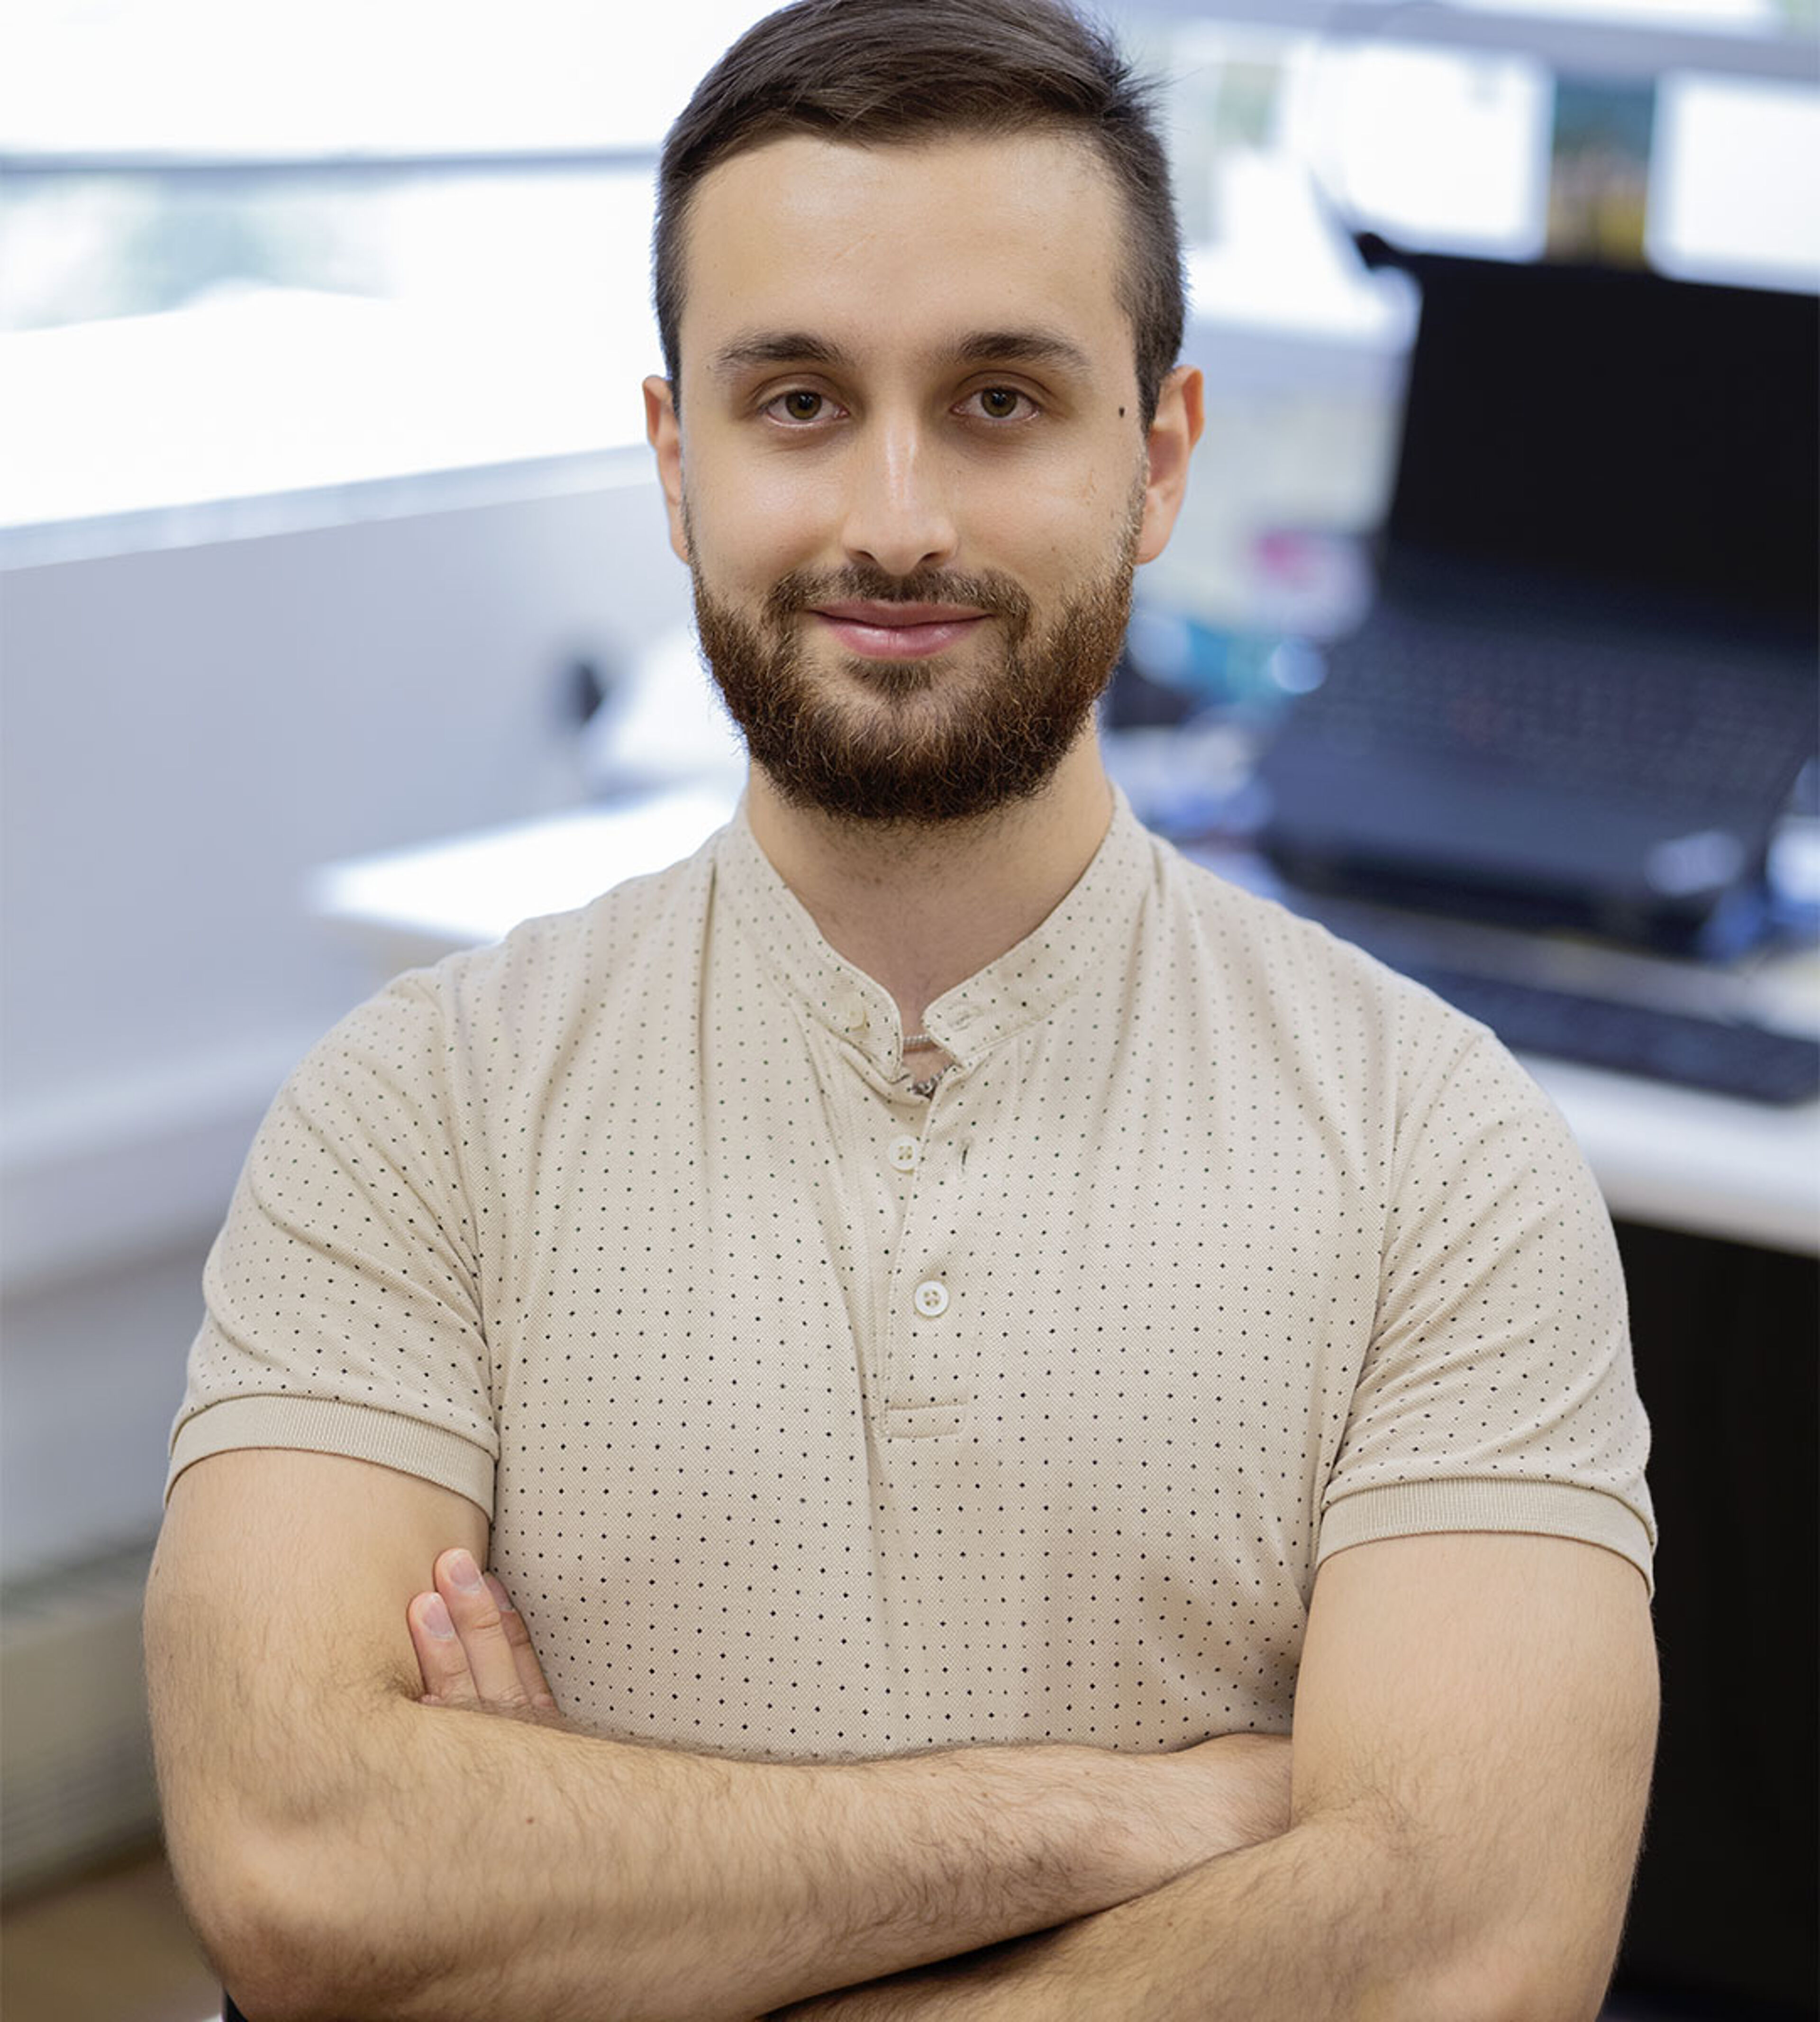 A well-groomed man with a beard in a polka-dot shirt, exuding confidence and approachability, stands in an office setting with a laptop in the background.